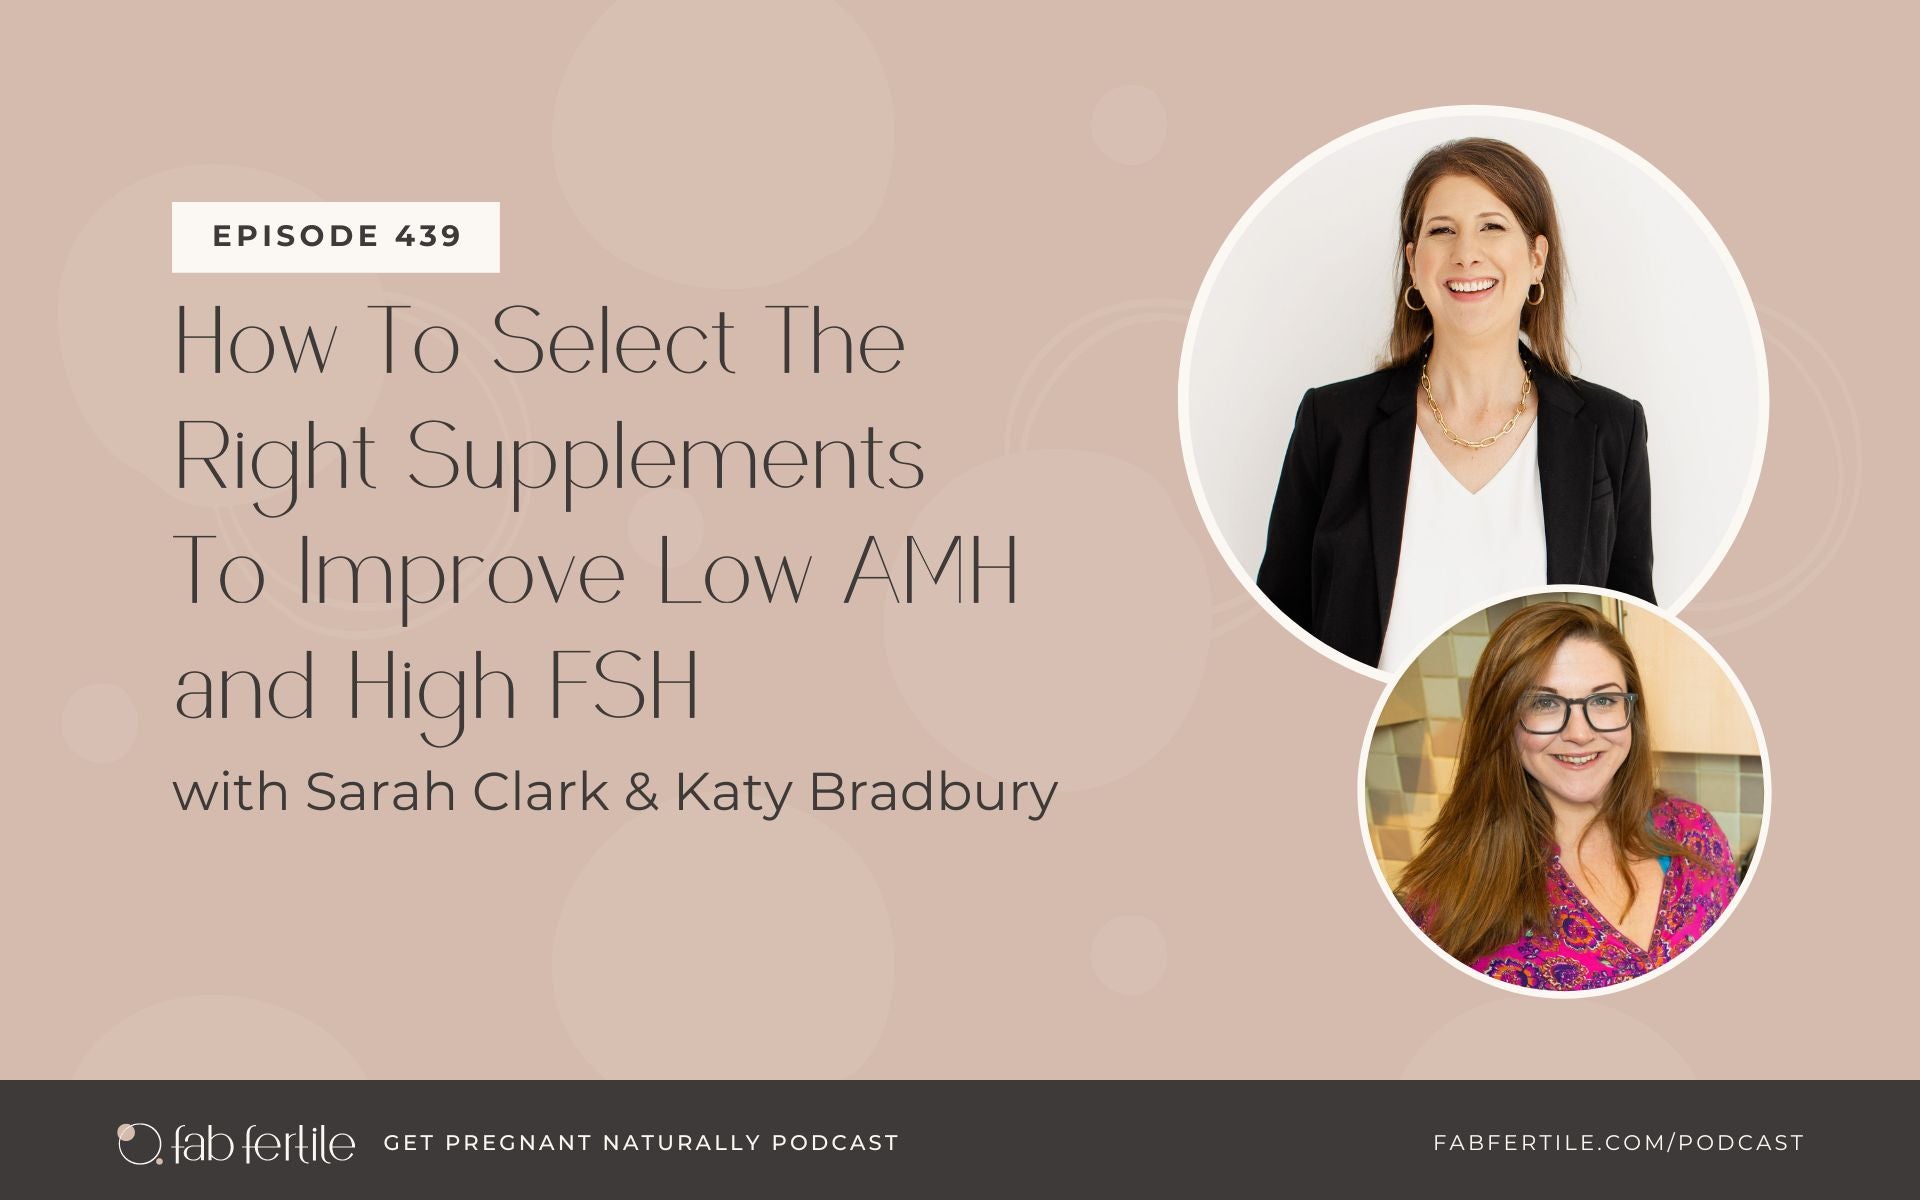 How To Select The Right Supplements To Improve Low AMH and High FSH